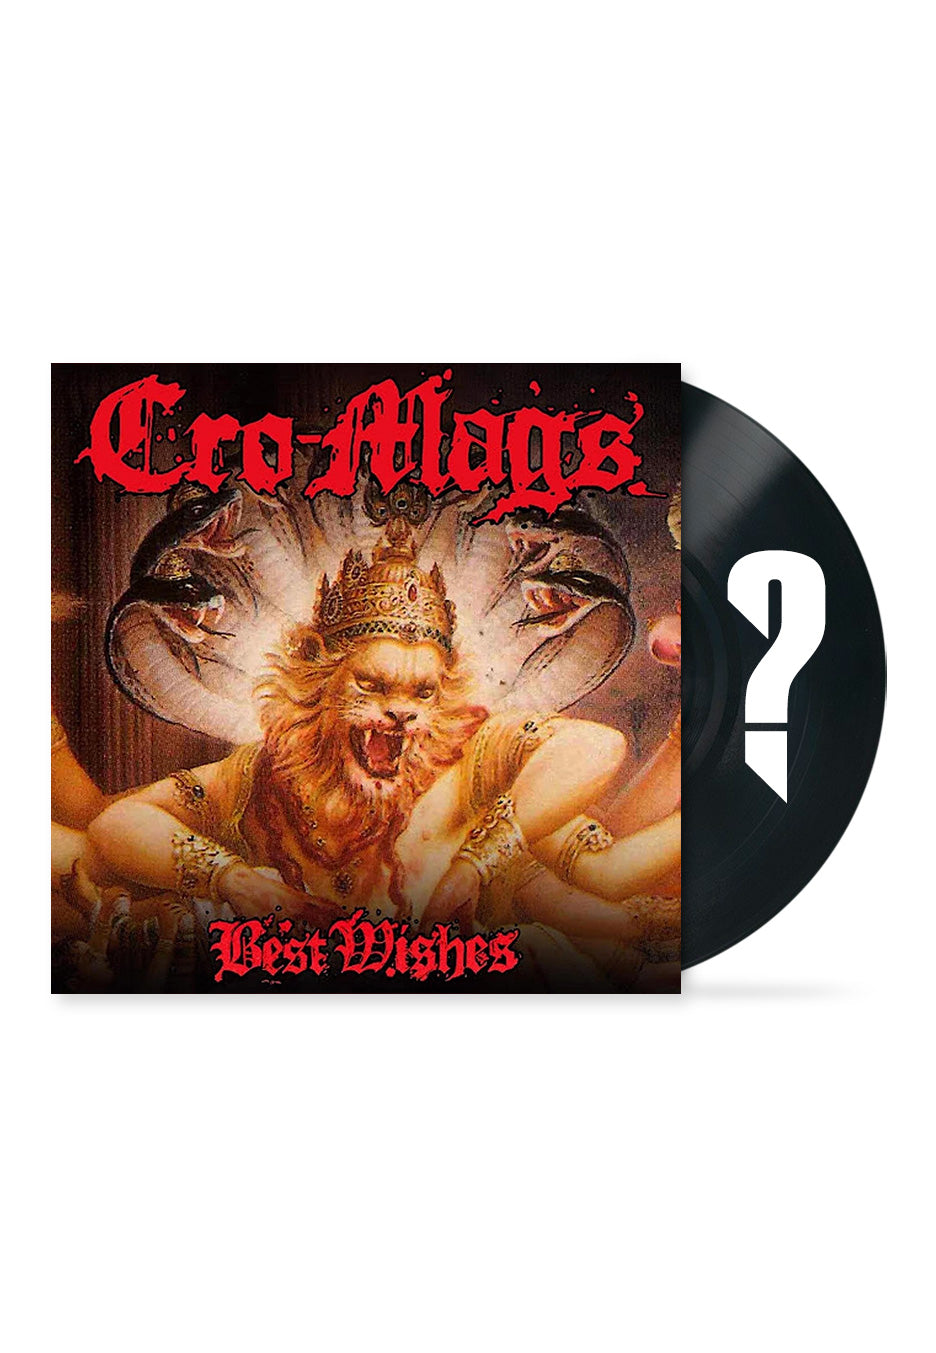 Cro-Mags - Best Wishes (crystal clear multicolor splatter) (Vinyle neuf/New LP)